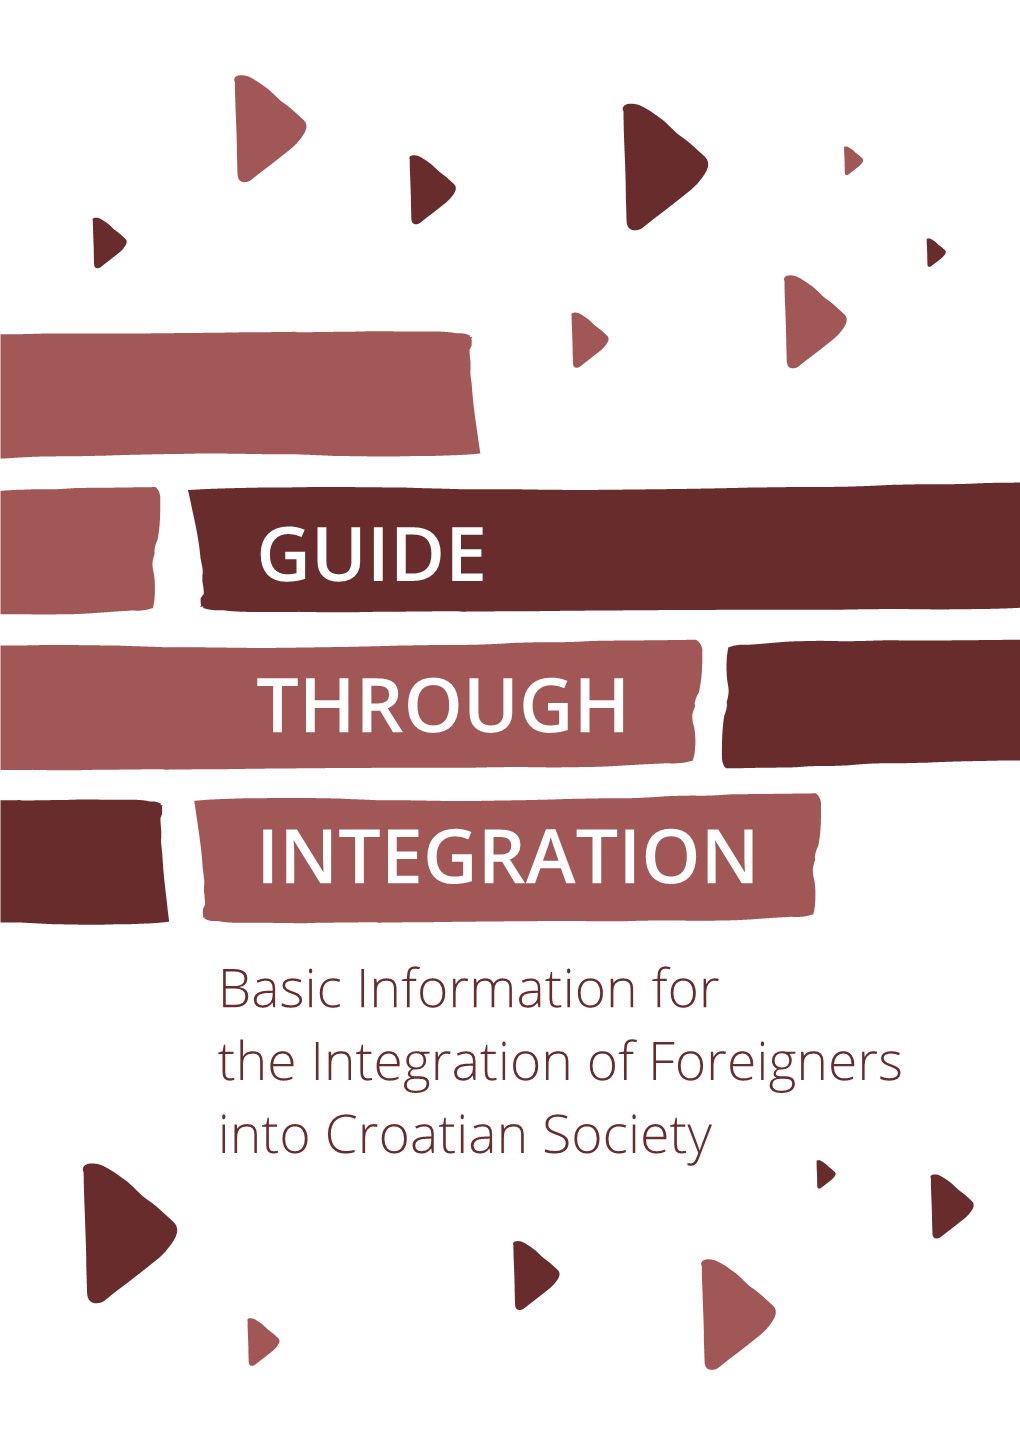 Guide Through Integration – Basic Information for the Integration of Aliens Into Croatian Society